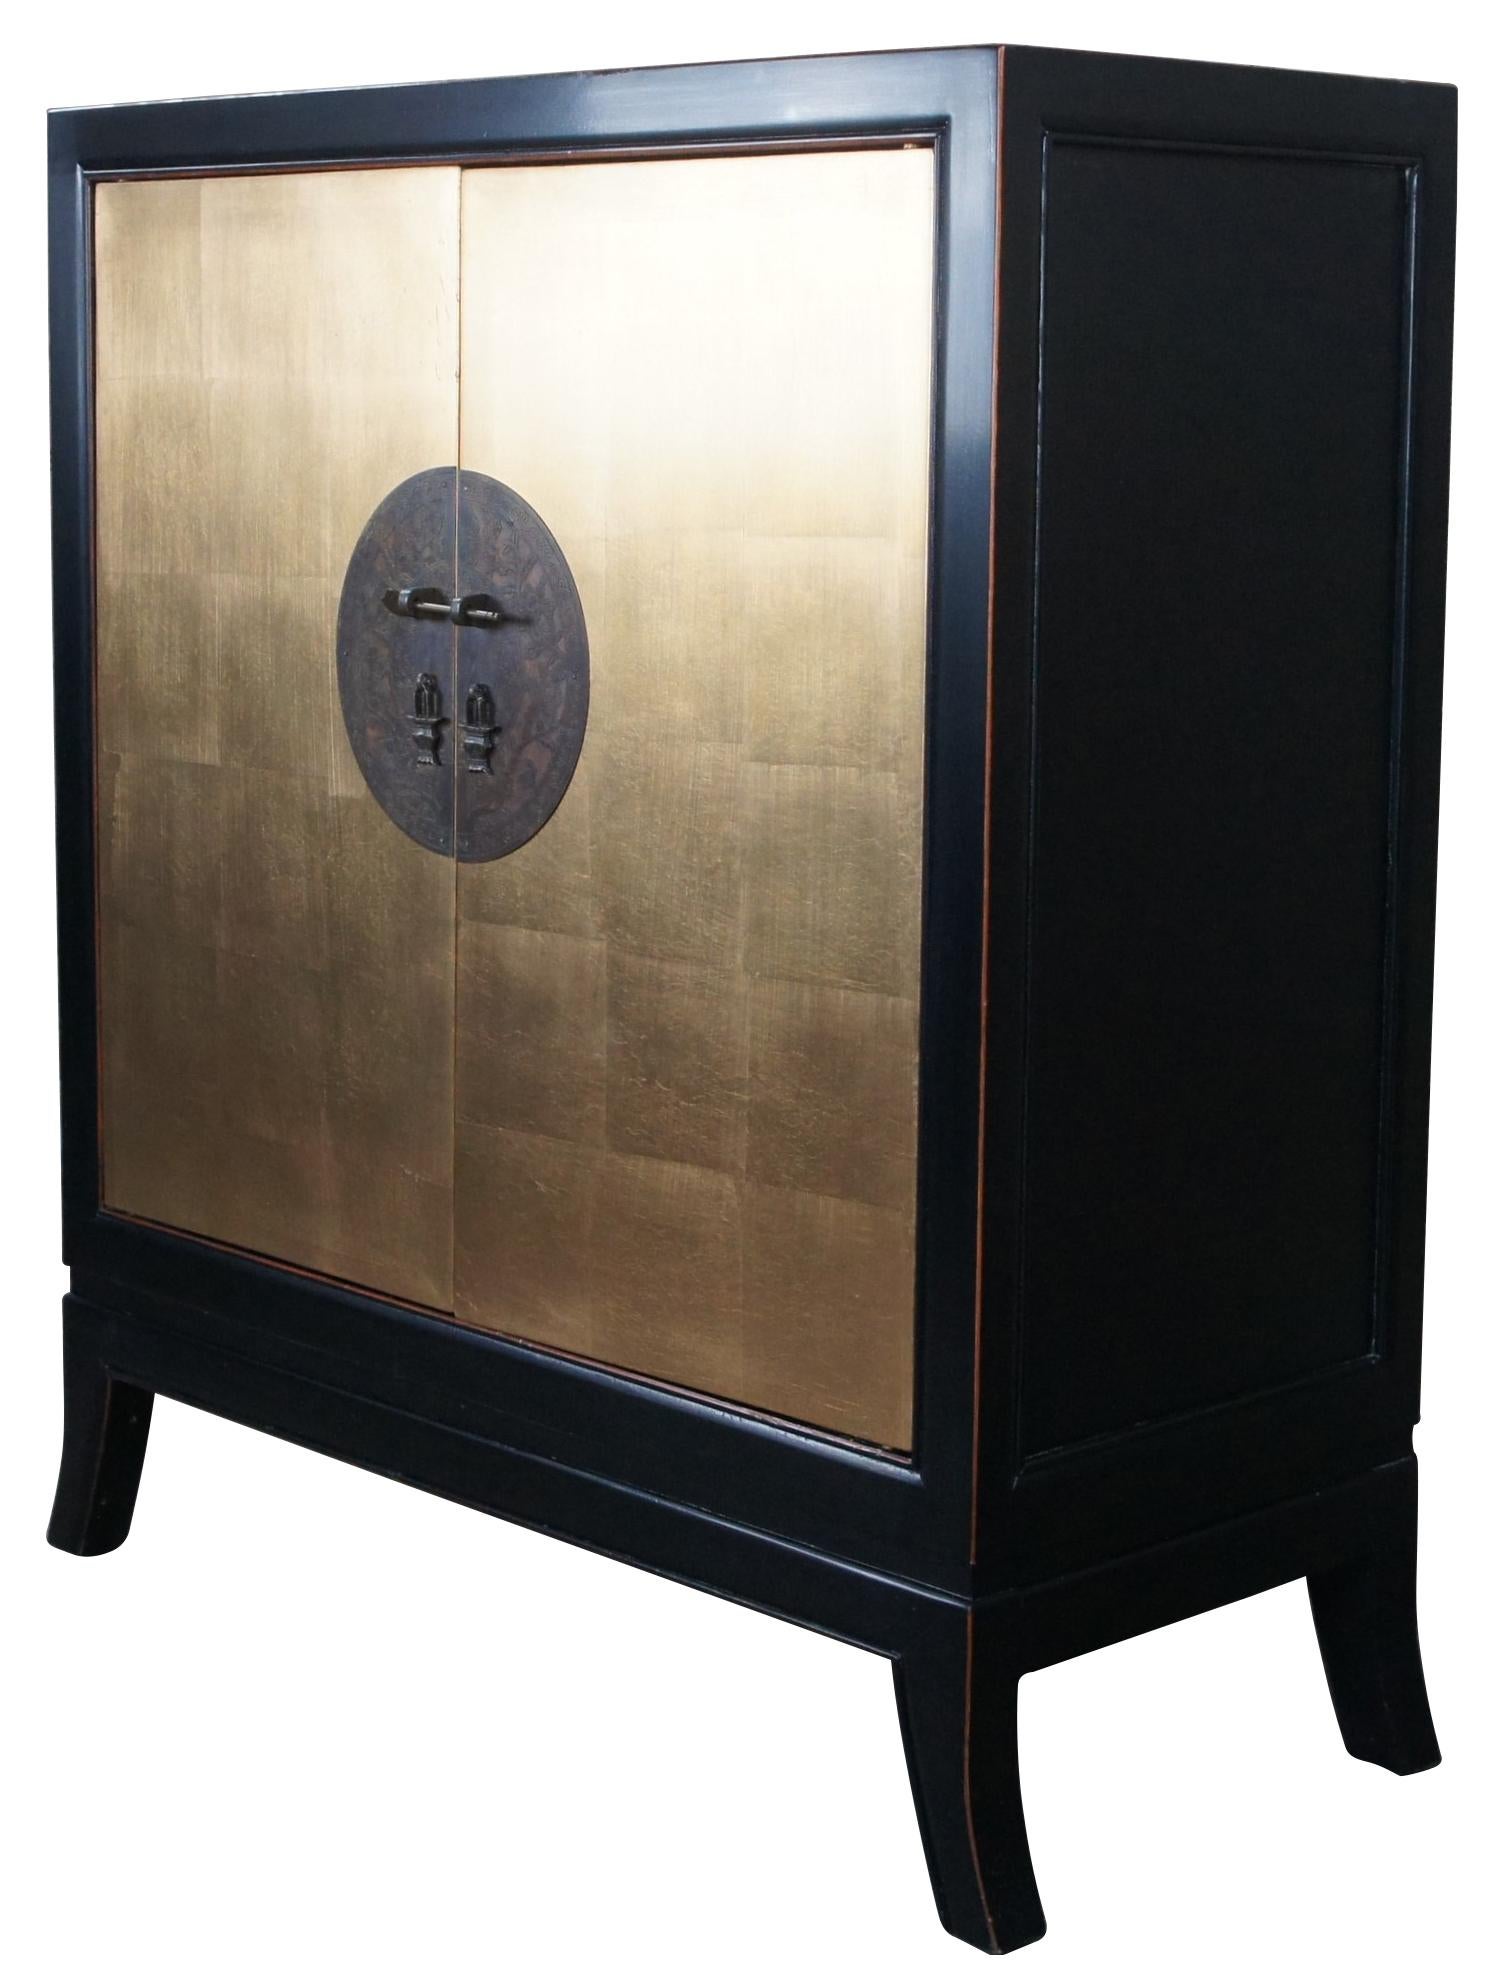 Ming (1368-1644) furniture style is characterized by its simple, clean, and pleasing lines. This reproduction Elmwood Ming cabinet is a fine example of the spare, elegant design. Handcrafted by master artisans in China with hand made gold leaf